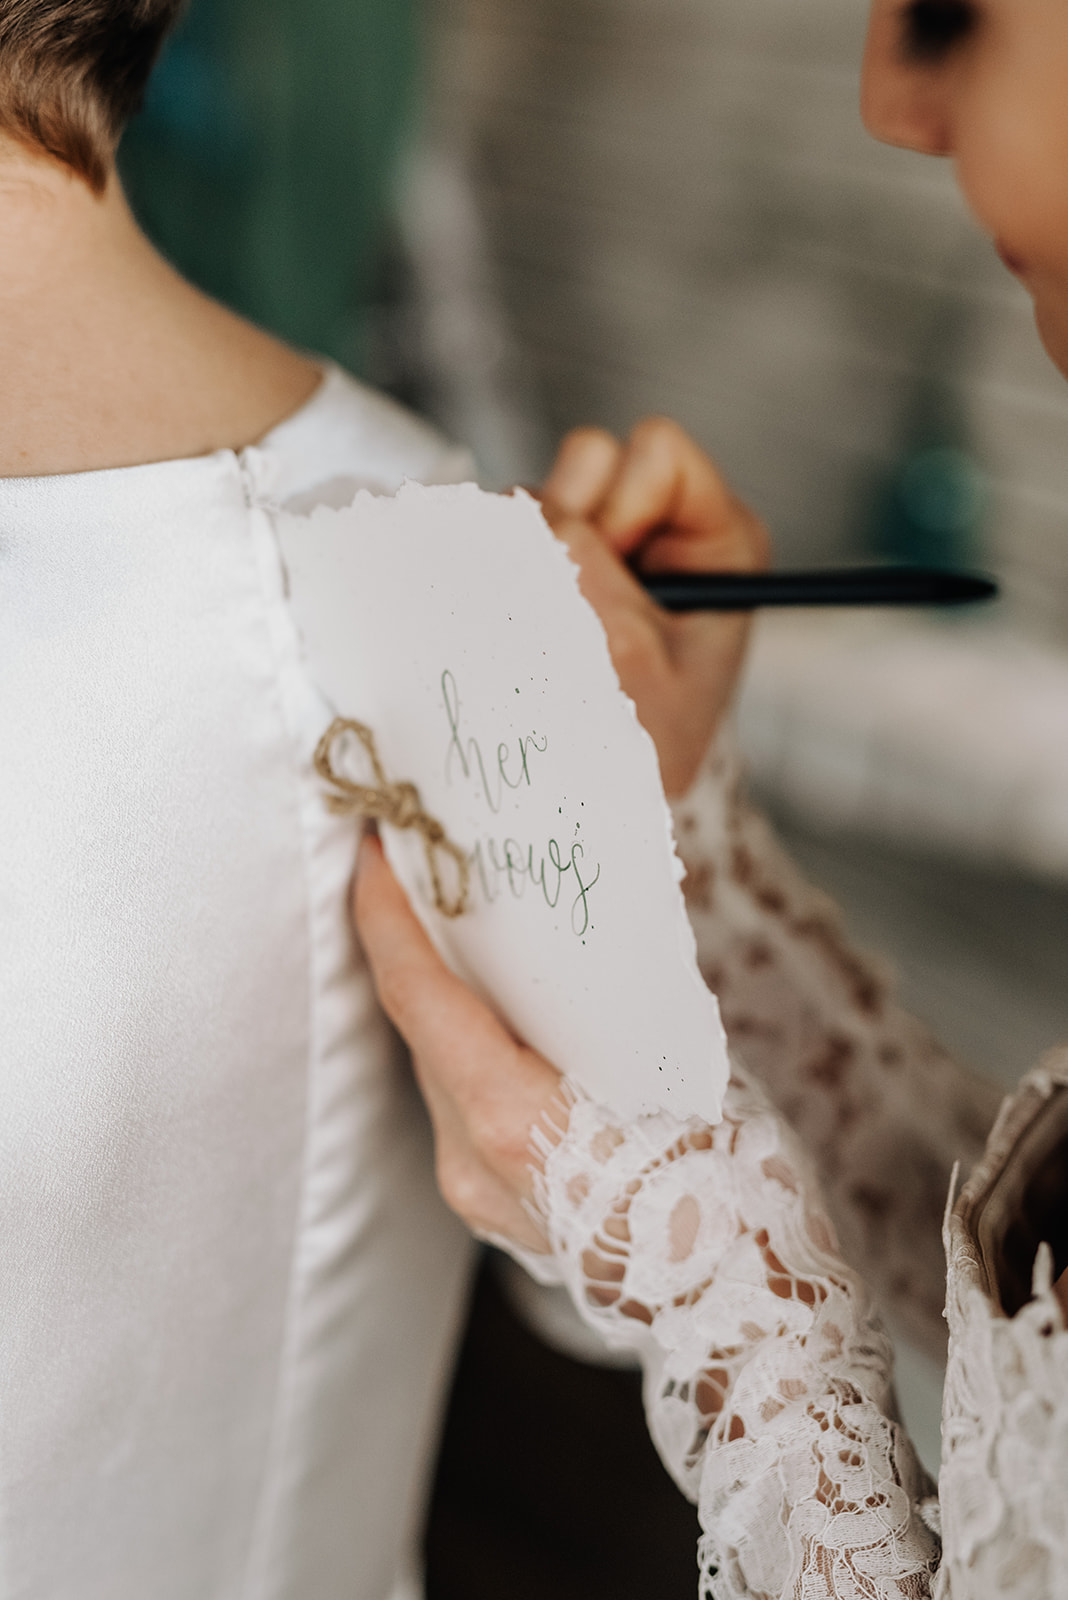 Brides take turns writing out their wedding vows on each other's backs